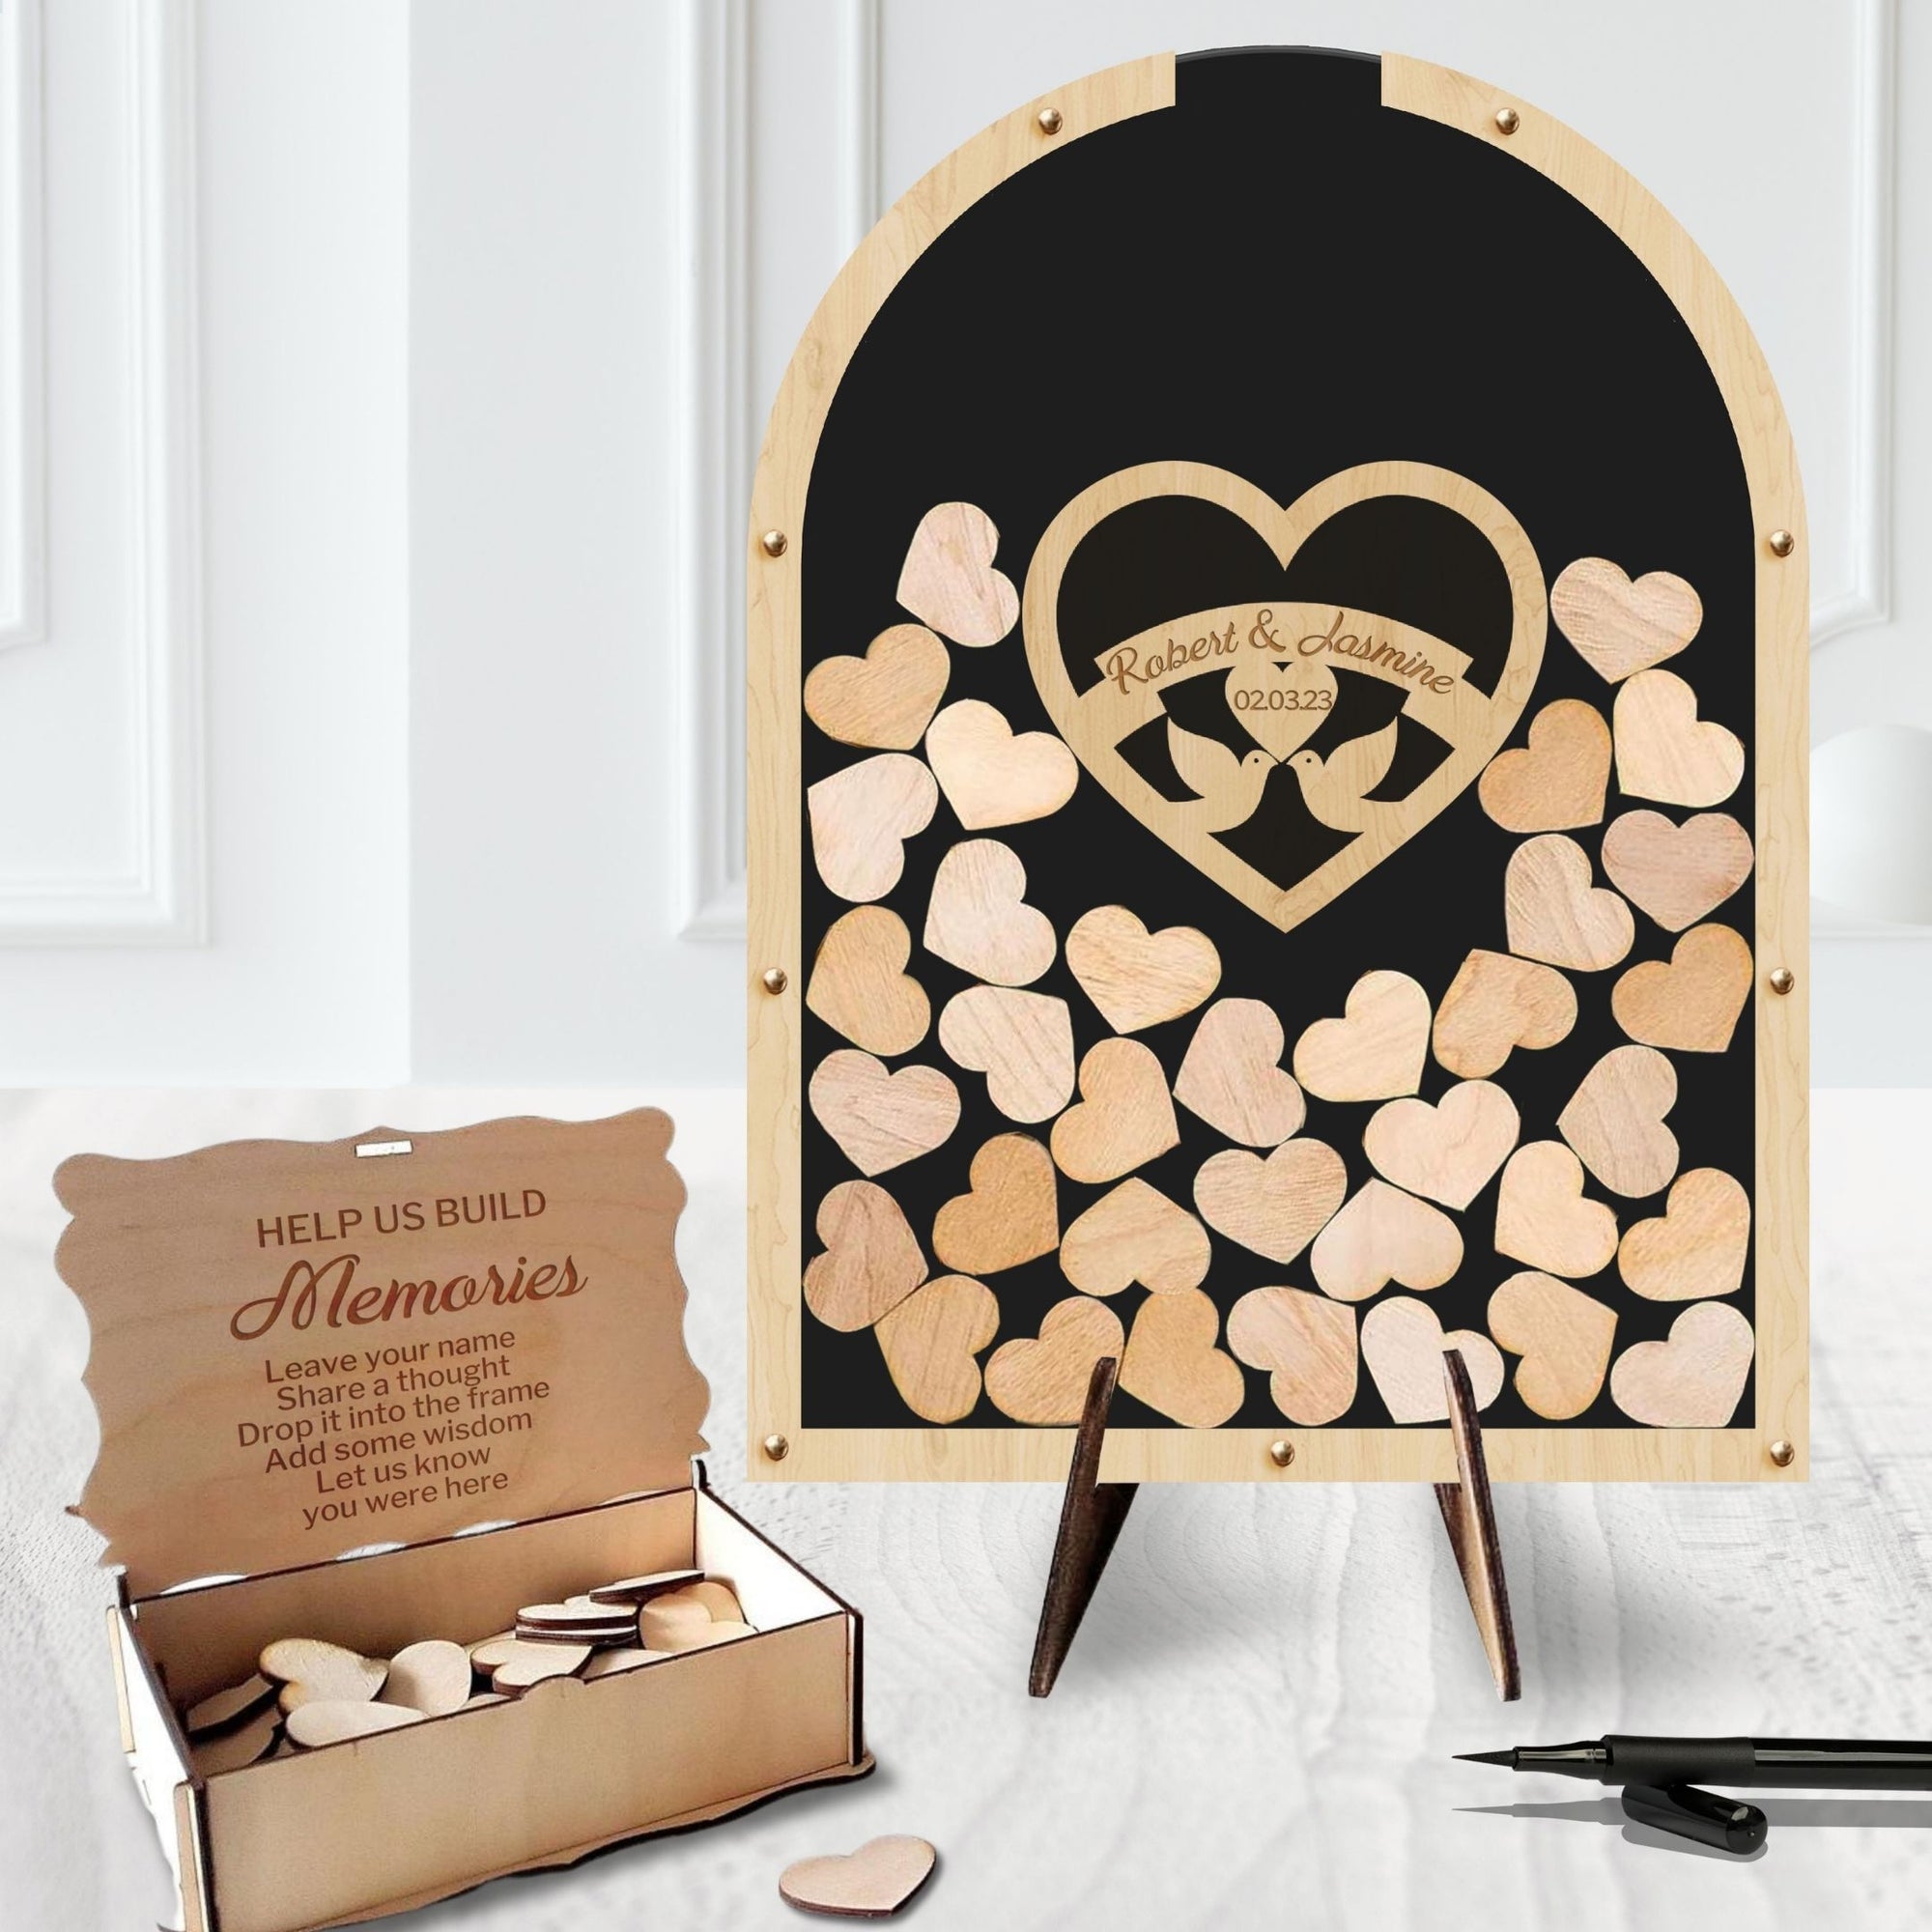 Custom Made Plywood &amp; Acrylic Arch Shape Wedding Heart Chips Drop Box, Rustic Personalised Guest Book Alternative, Stationery Table Decor